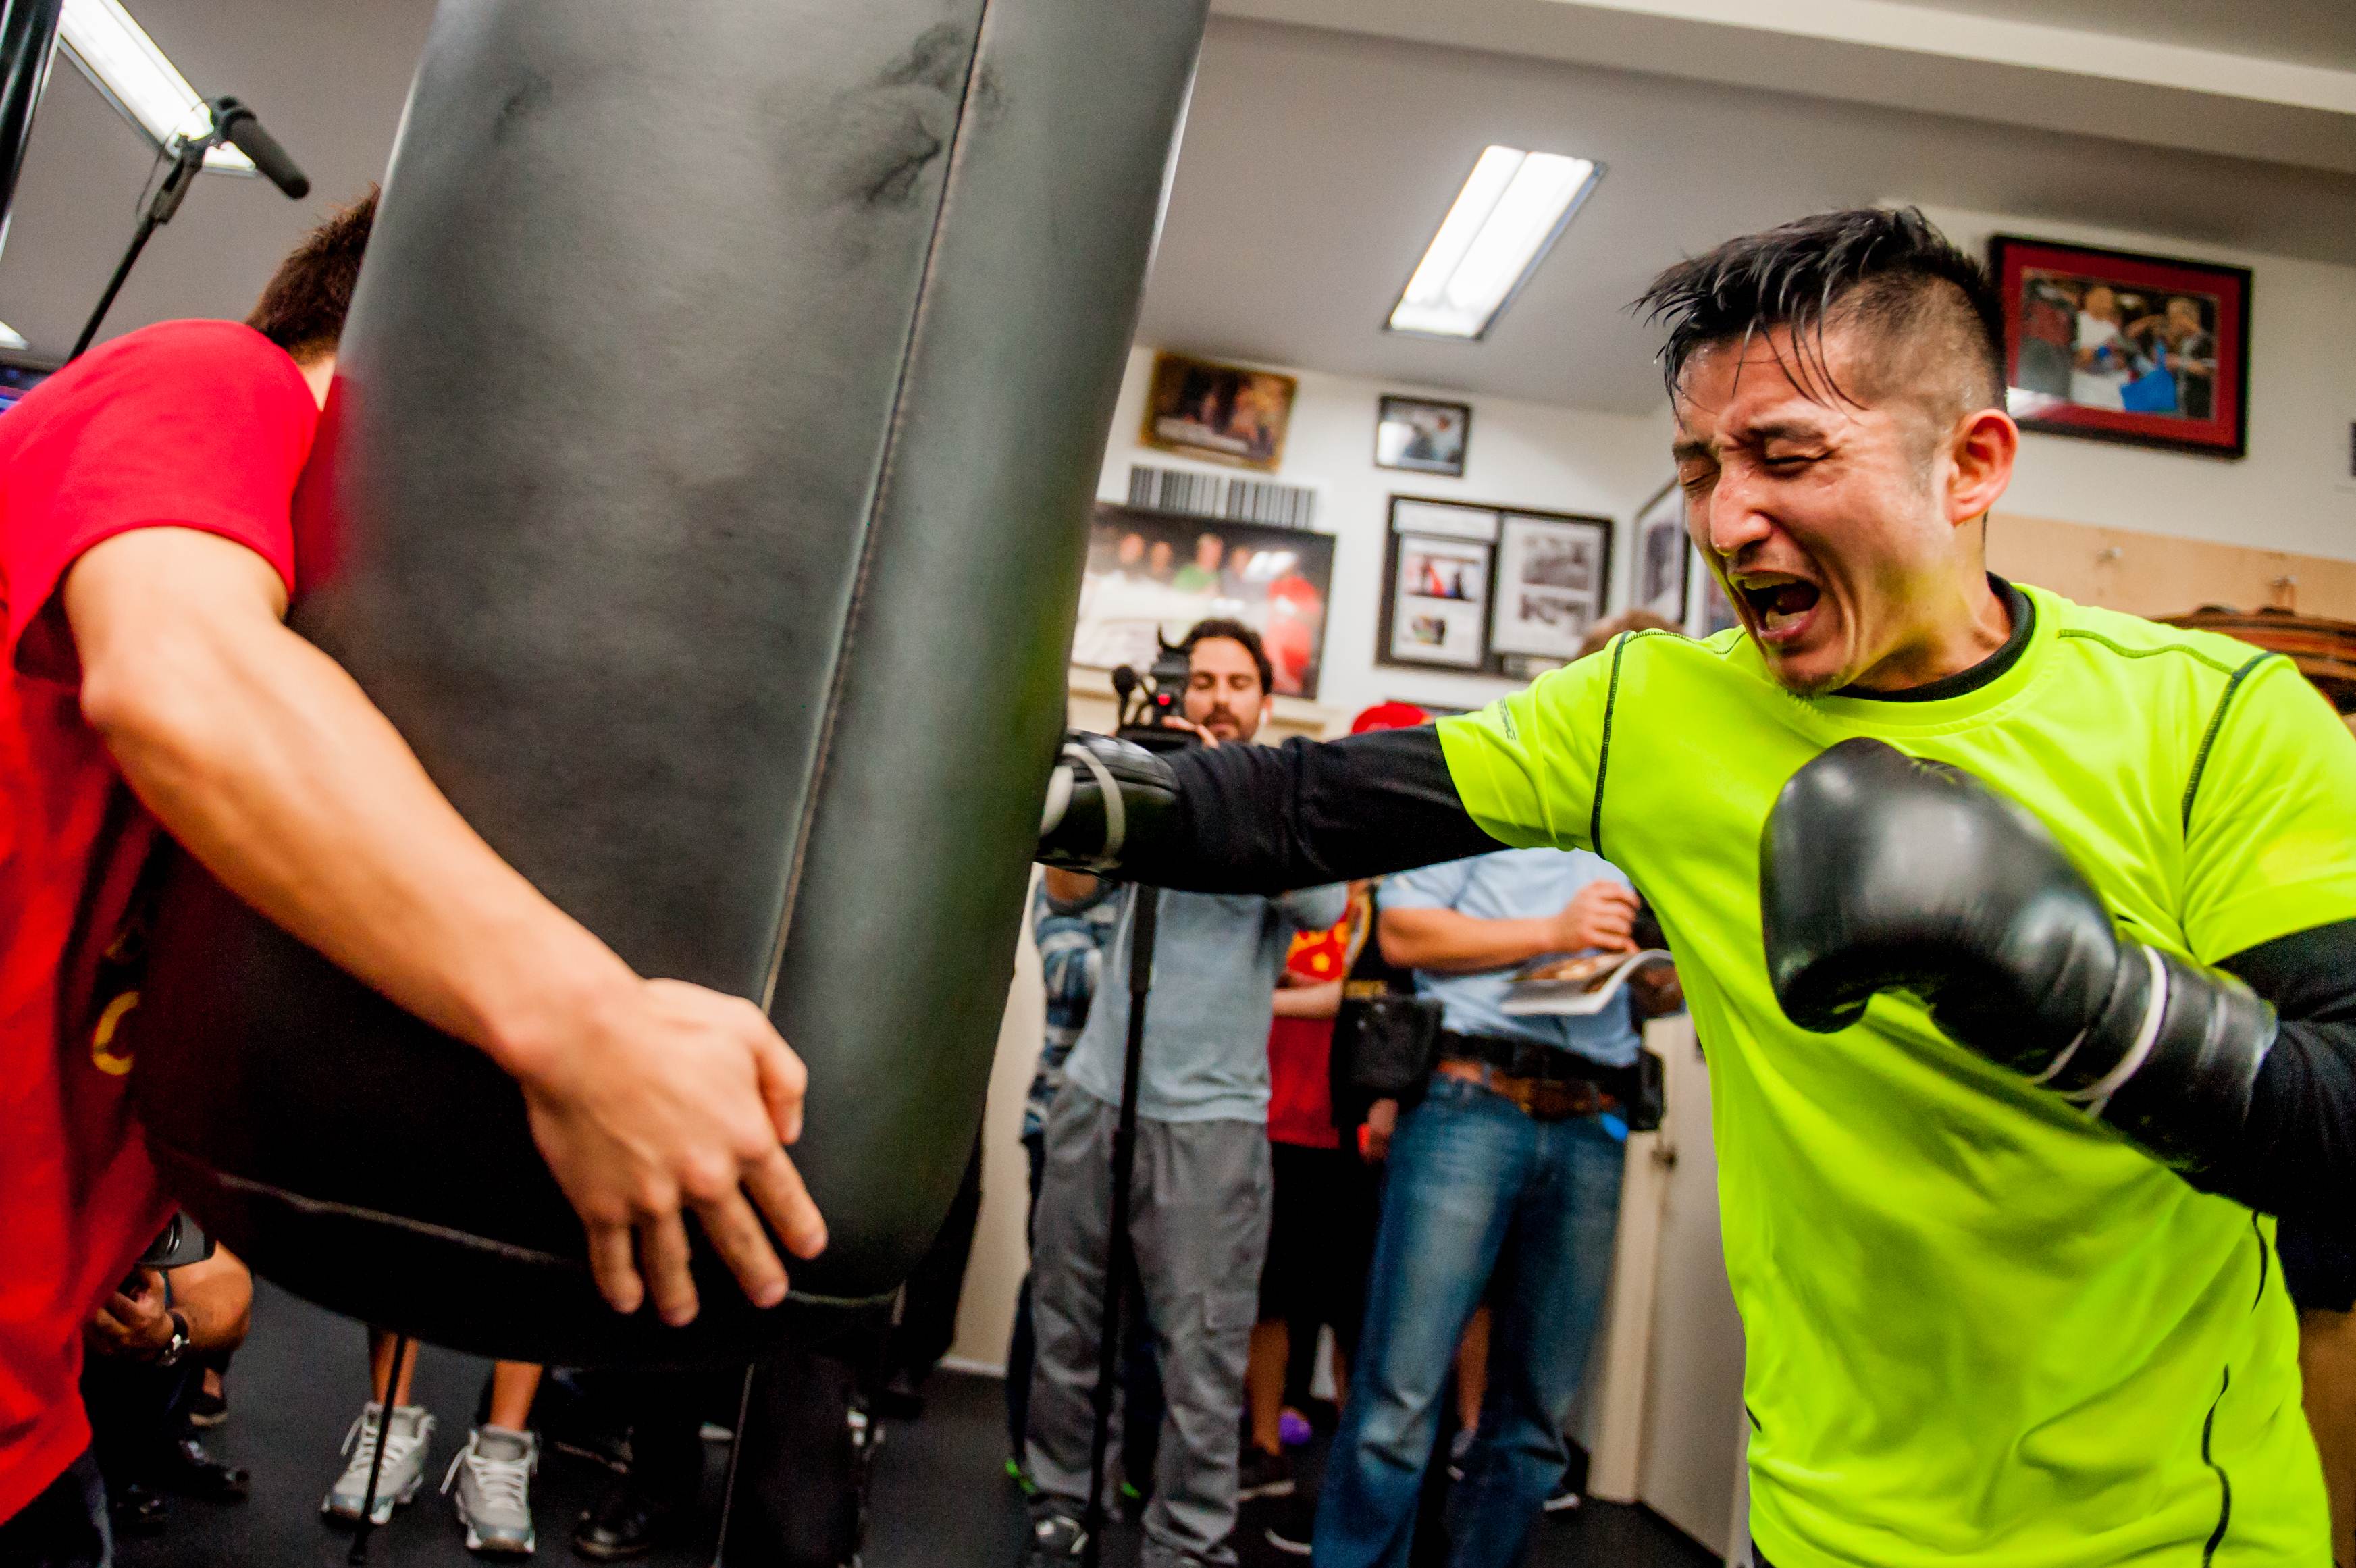 HOLLYWOOD, CA - FEBRUARY 17: Boxer Zou Shiming of China works out with a trainer during a media workout session at Wild Card Boxing Club on February 17, 2015 in Hollywood, California. Jonathan Moore/Getty Images/AFP == FOR NEWSPAPERS, INTERNET, TELCOS & TELEVISION USE ONLY ==